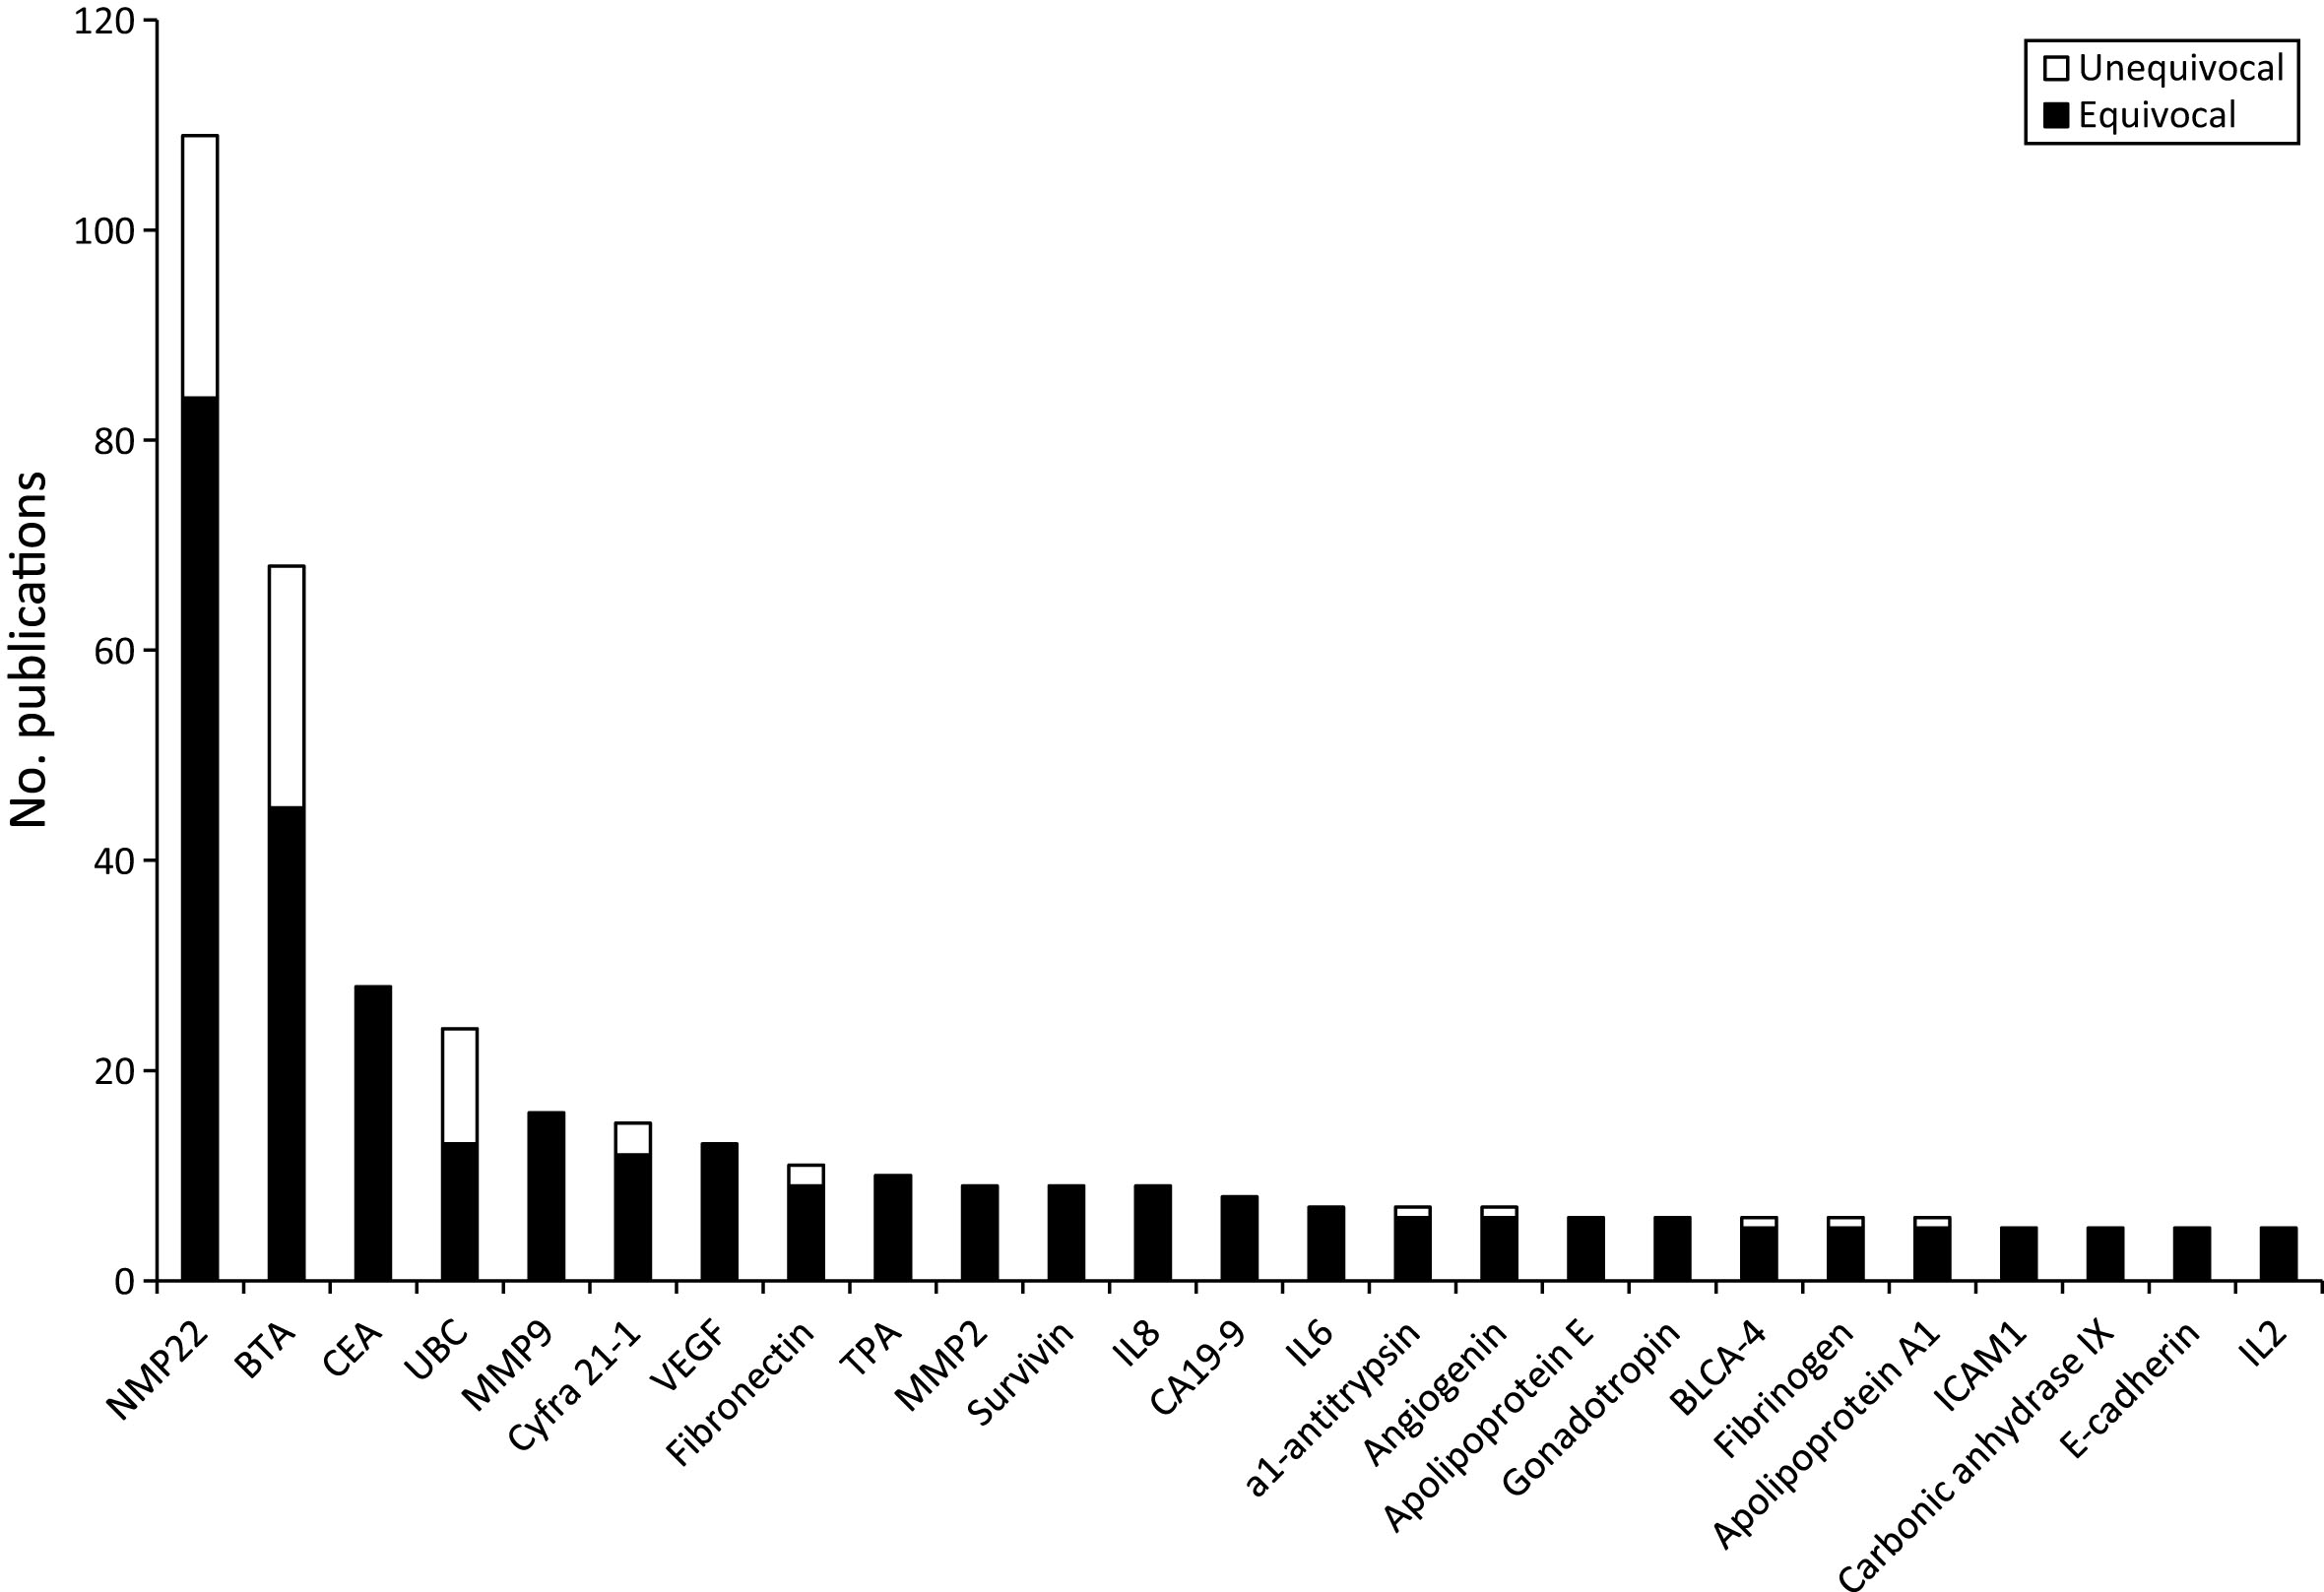 Numbers of publications for the most commonly investigated urinary protein biomarkers. Papers providing measurement data included, reviews excluded.